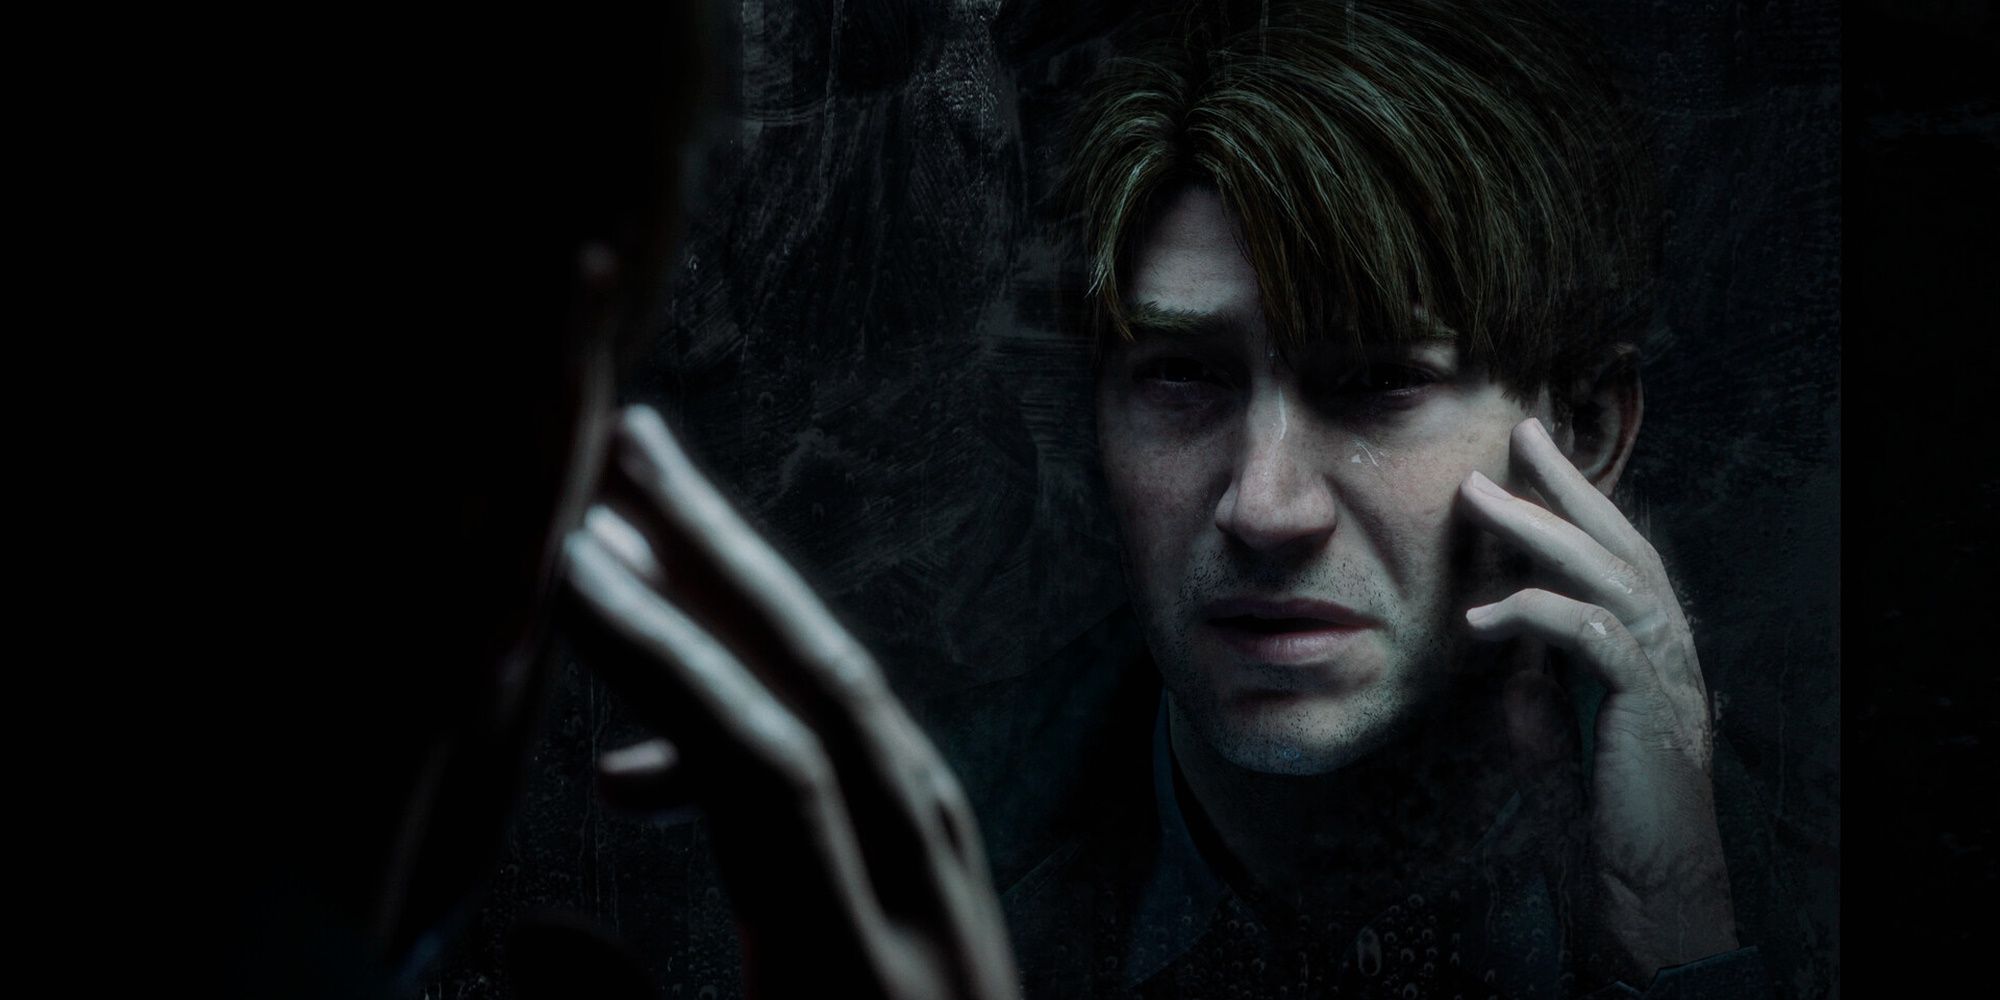 Silent Hill 2 Remake Is A “Poison Chalice” According To Sam Barlow